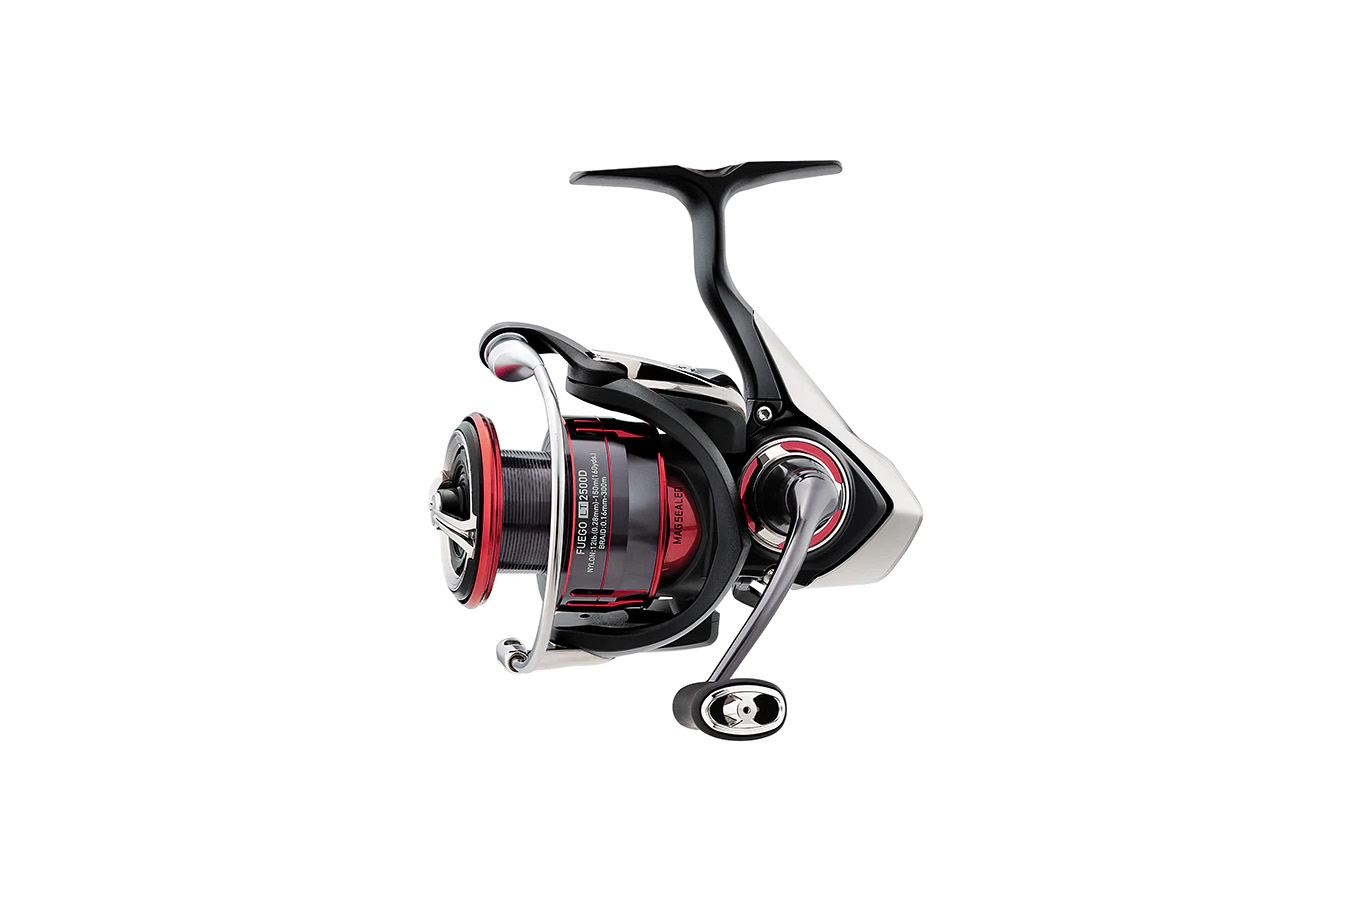 Discount Daiwa Fuego LT 6.2:1 Spinning Reel for Sale